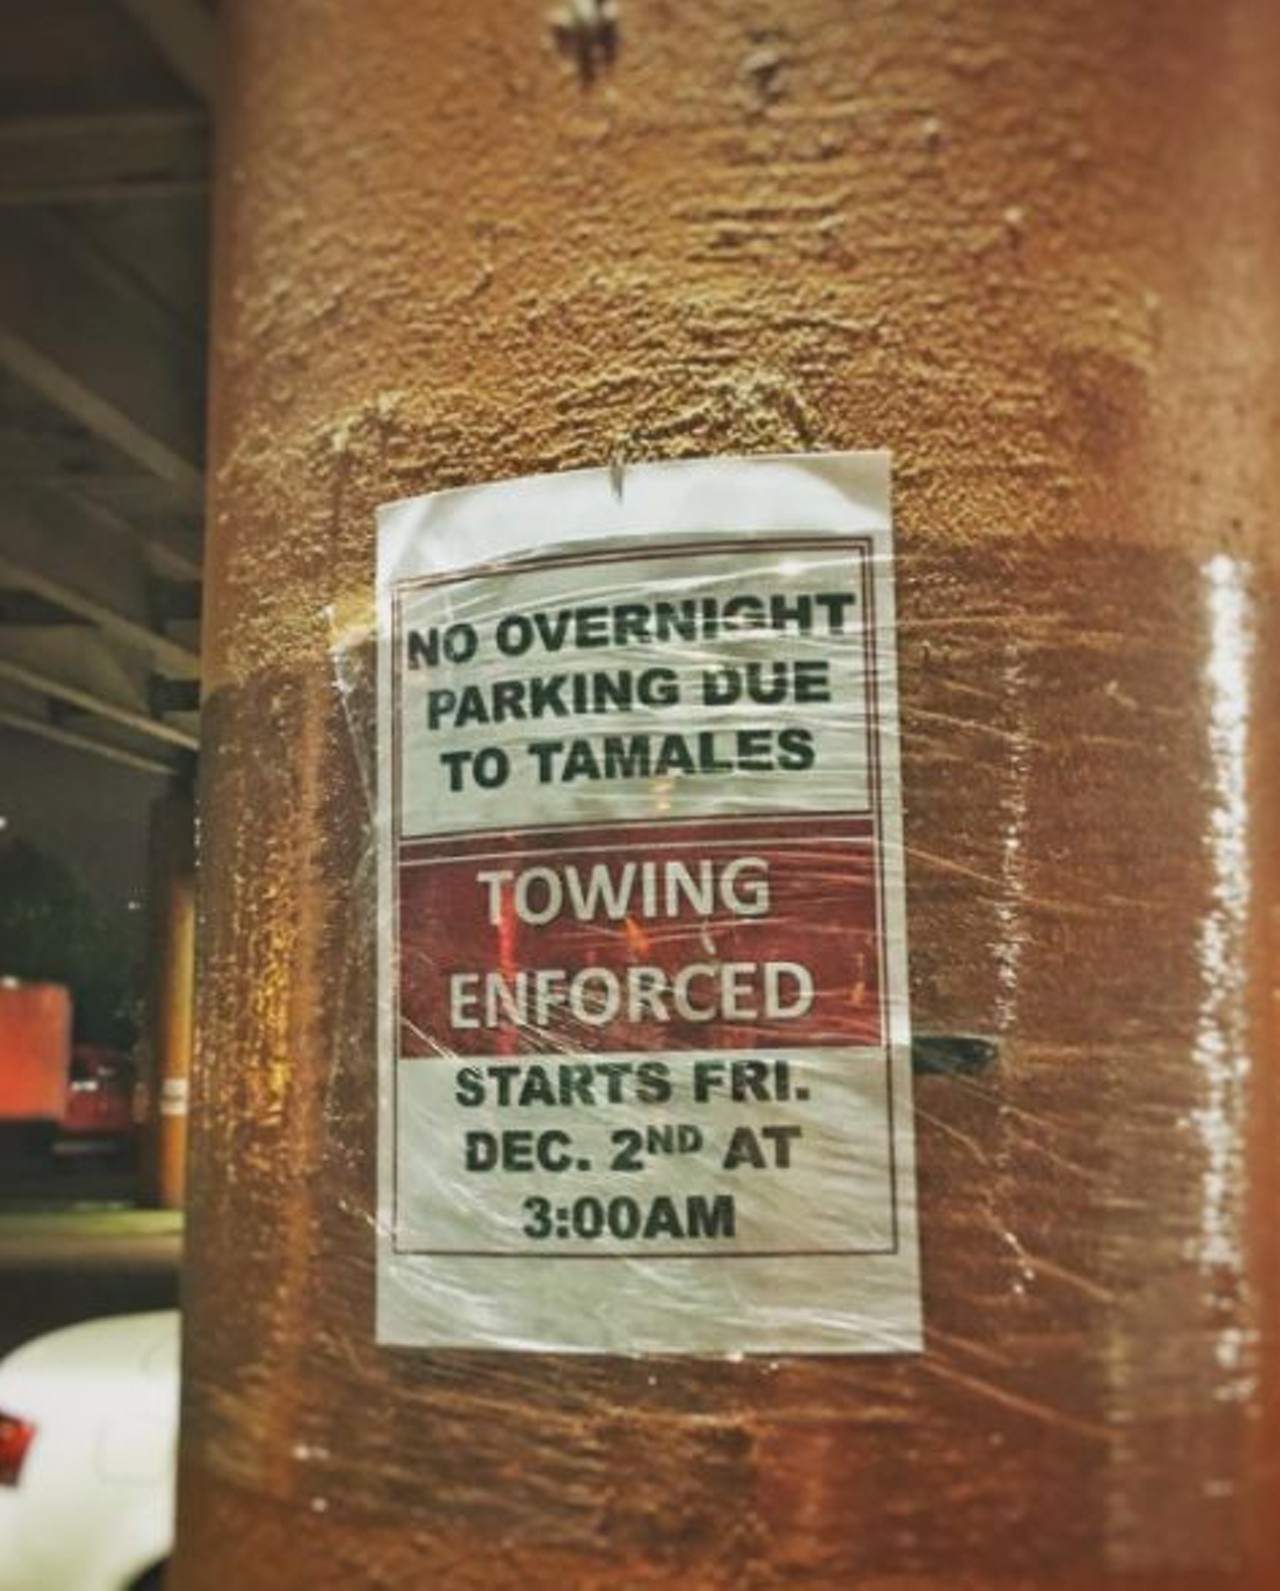 Tamale season isn&#146;t a joke
Worth waiting in line for hours, it&#146;s all you eat for a month and it changes parking. We take tamales very seriously.
Photo via Instagram, lsemidey88